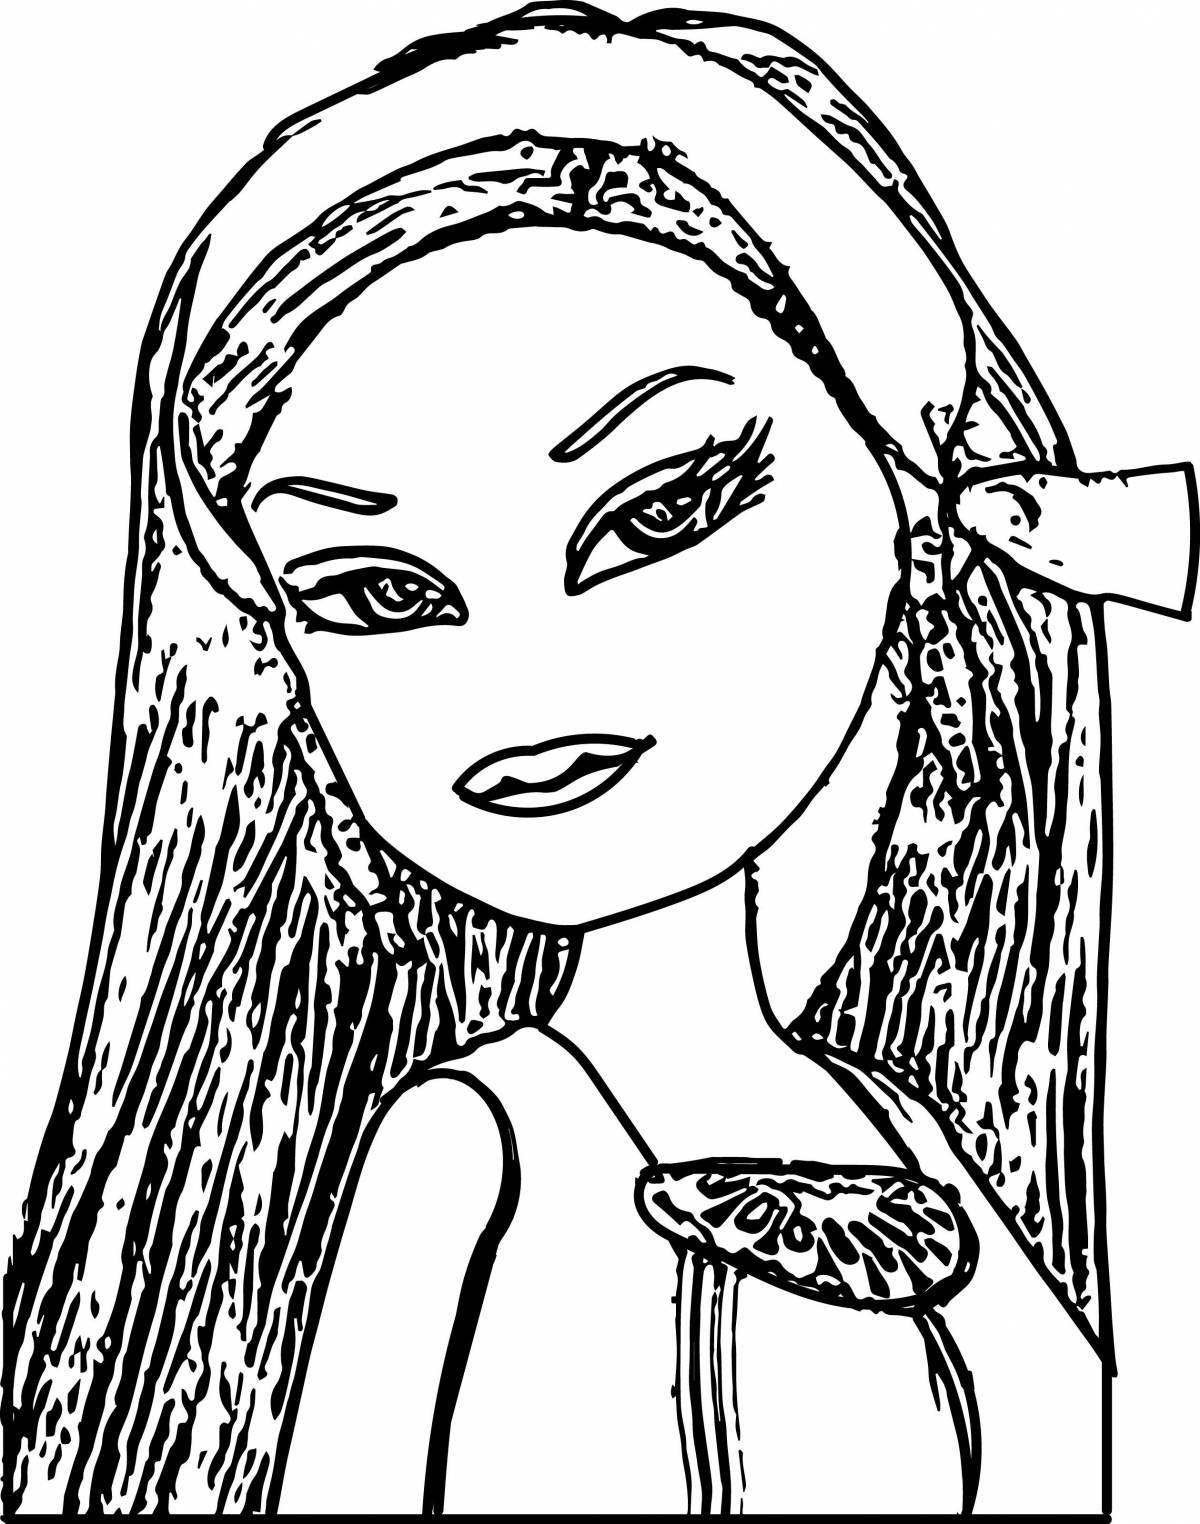 Coloring page glamor doll with makeup